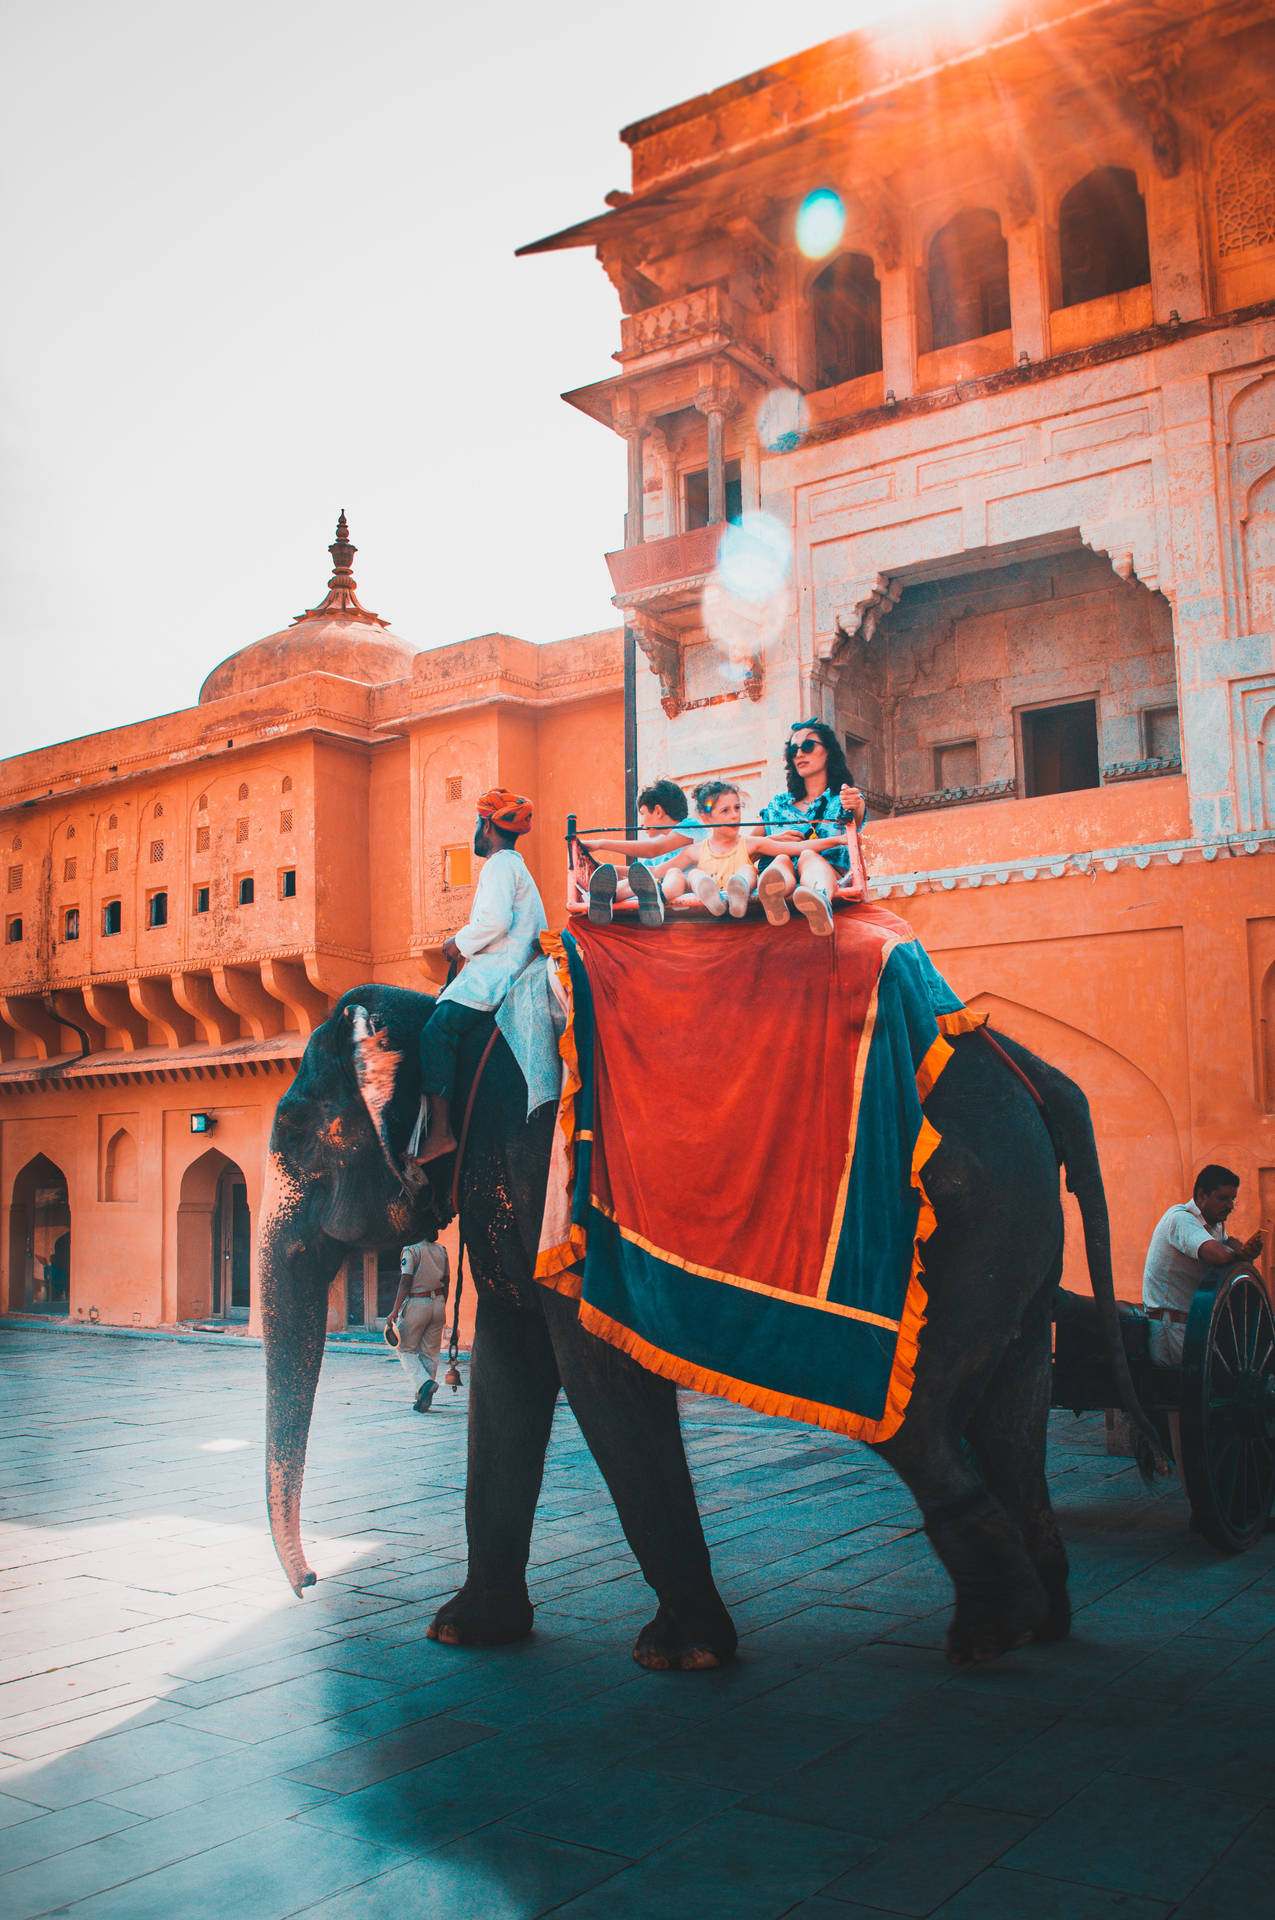 Tourists Riding Elephant In Jaipur Wallpaper